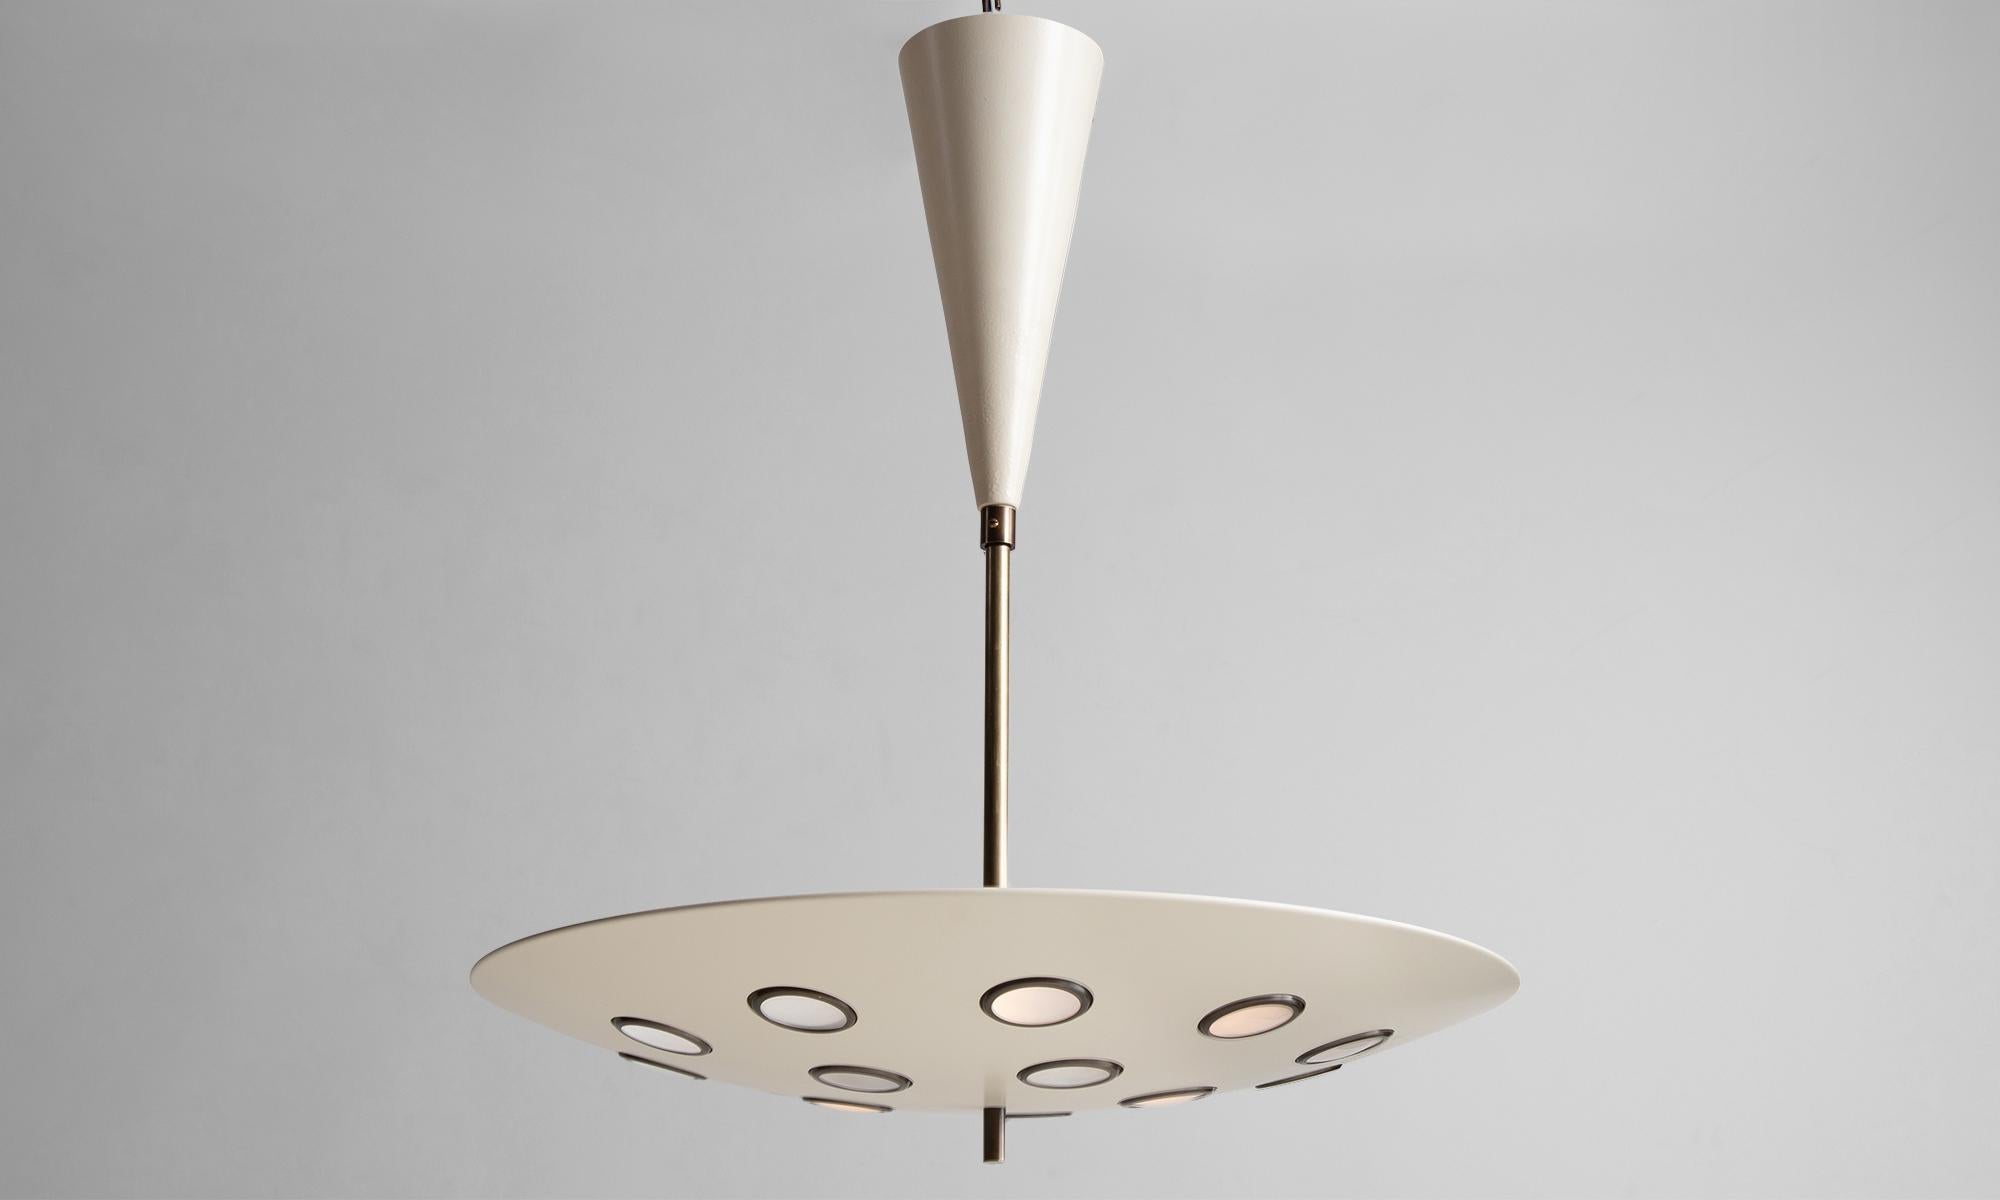 Cream Cutout Chandelier
Made in Italy
Brass chandelier with painted aluminum disc with 15 satin lenses. E27 socket
24”d x 28”h
Ref. L4386

*4-6 Week Lead Time*
*EU Wiring / Not UL Listed*
*Cone Canopy  (12.25